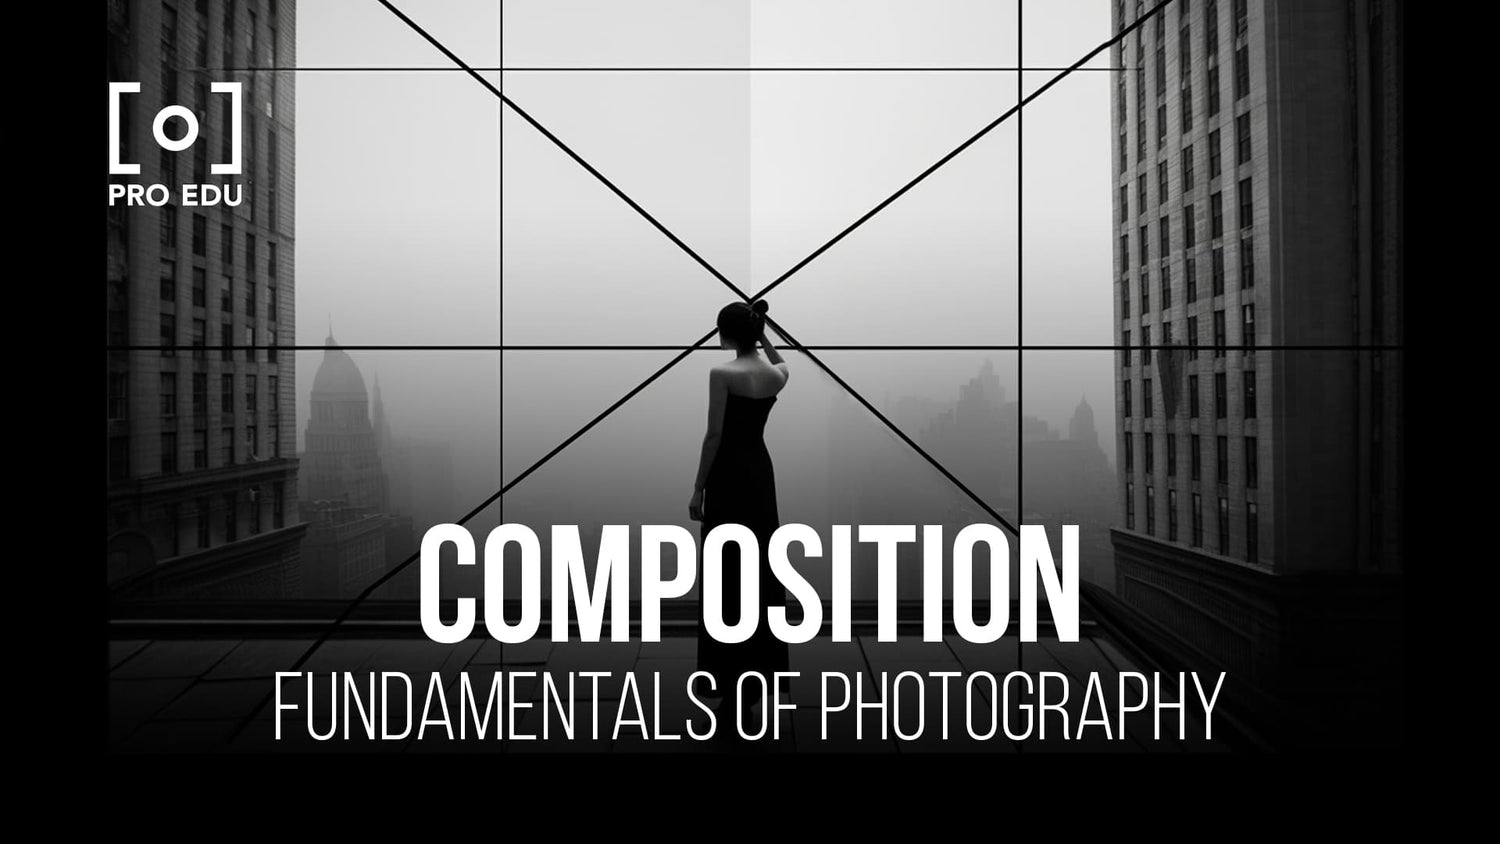 Crafting visually stunning images through composition techniques in photography